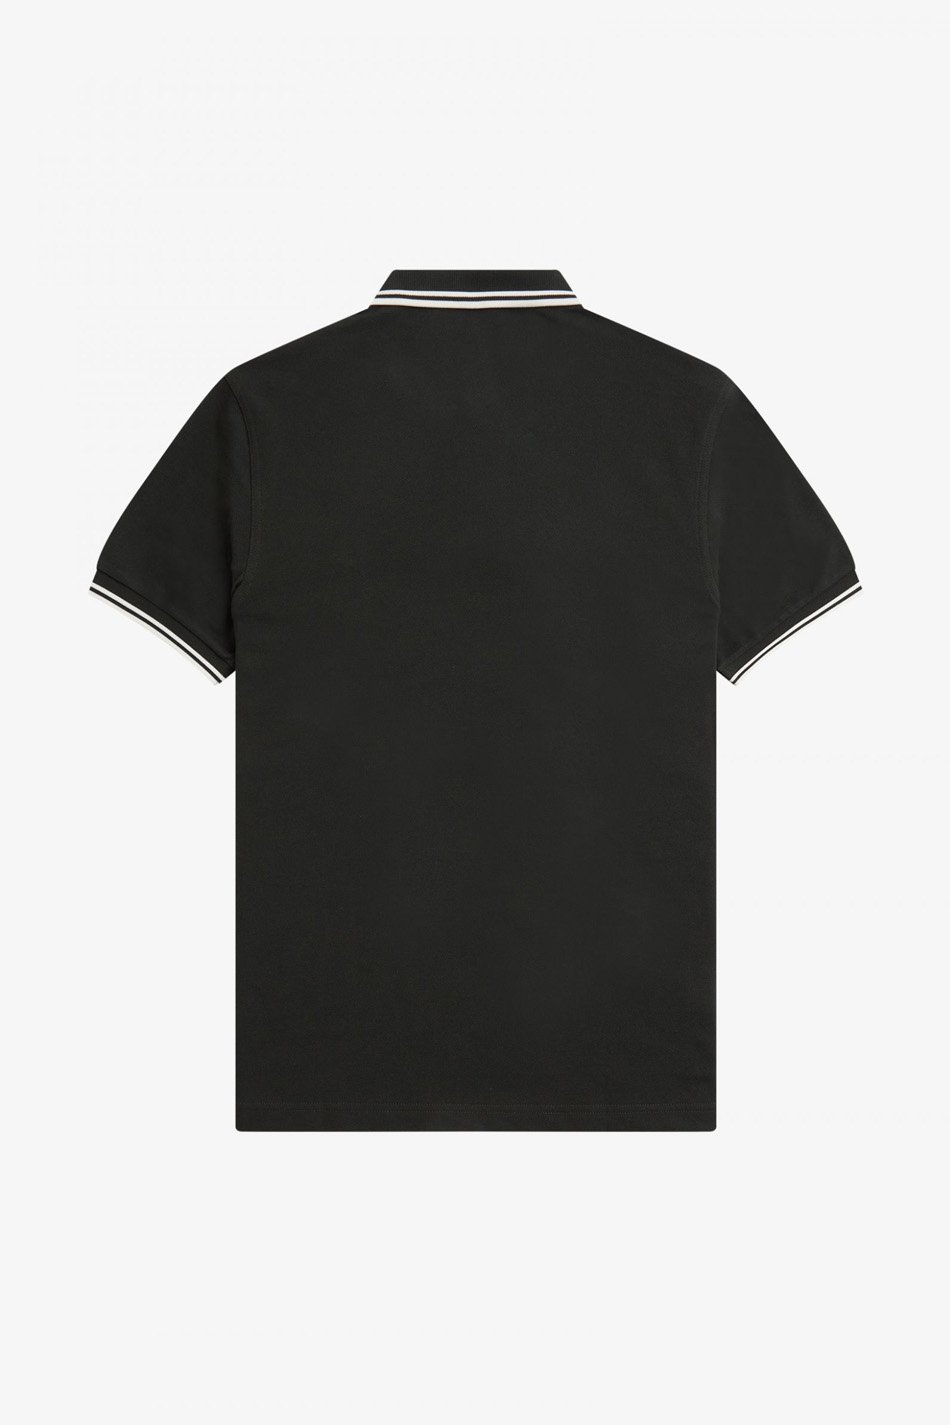 White/Black Fred Perry Polo Shirt